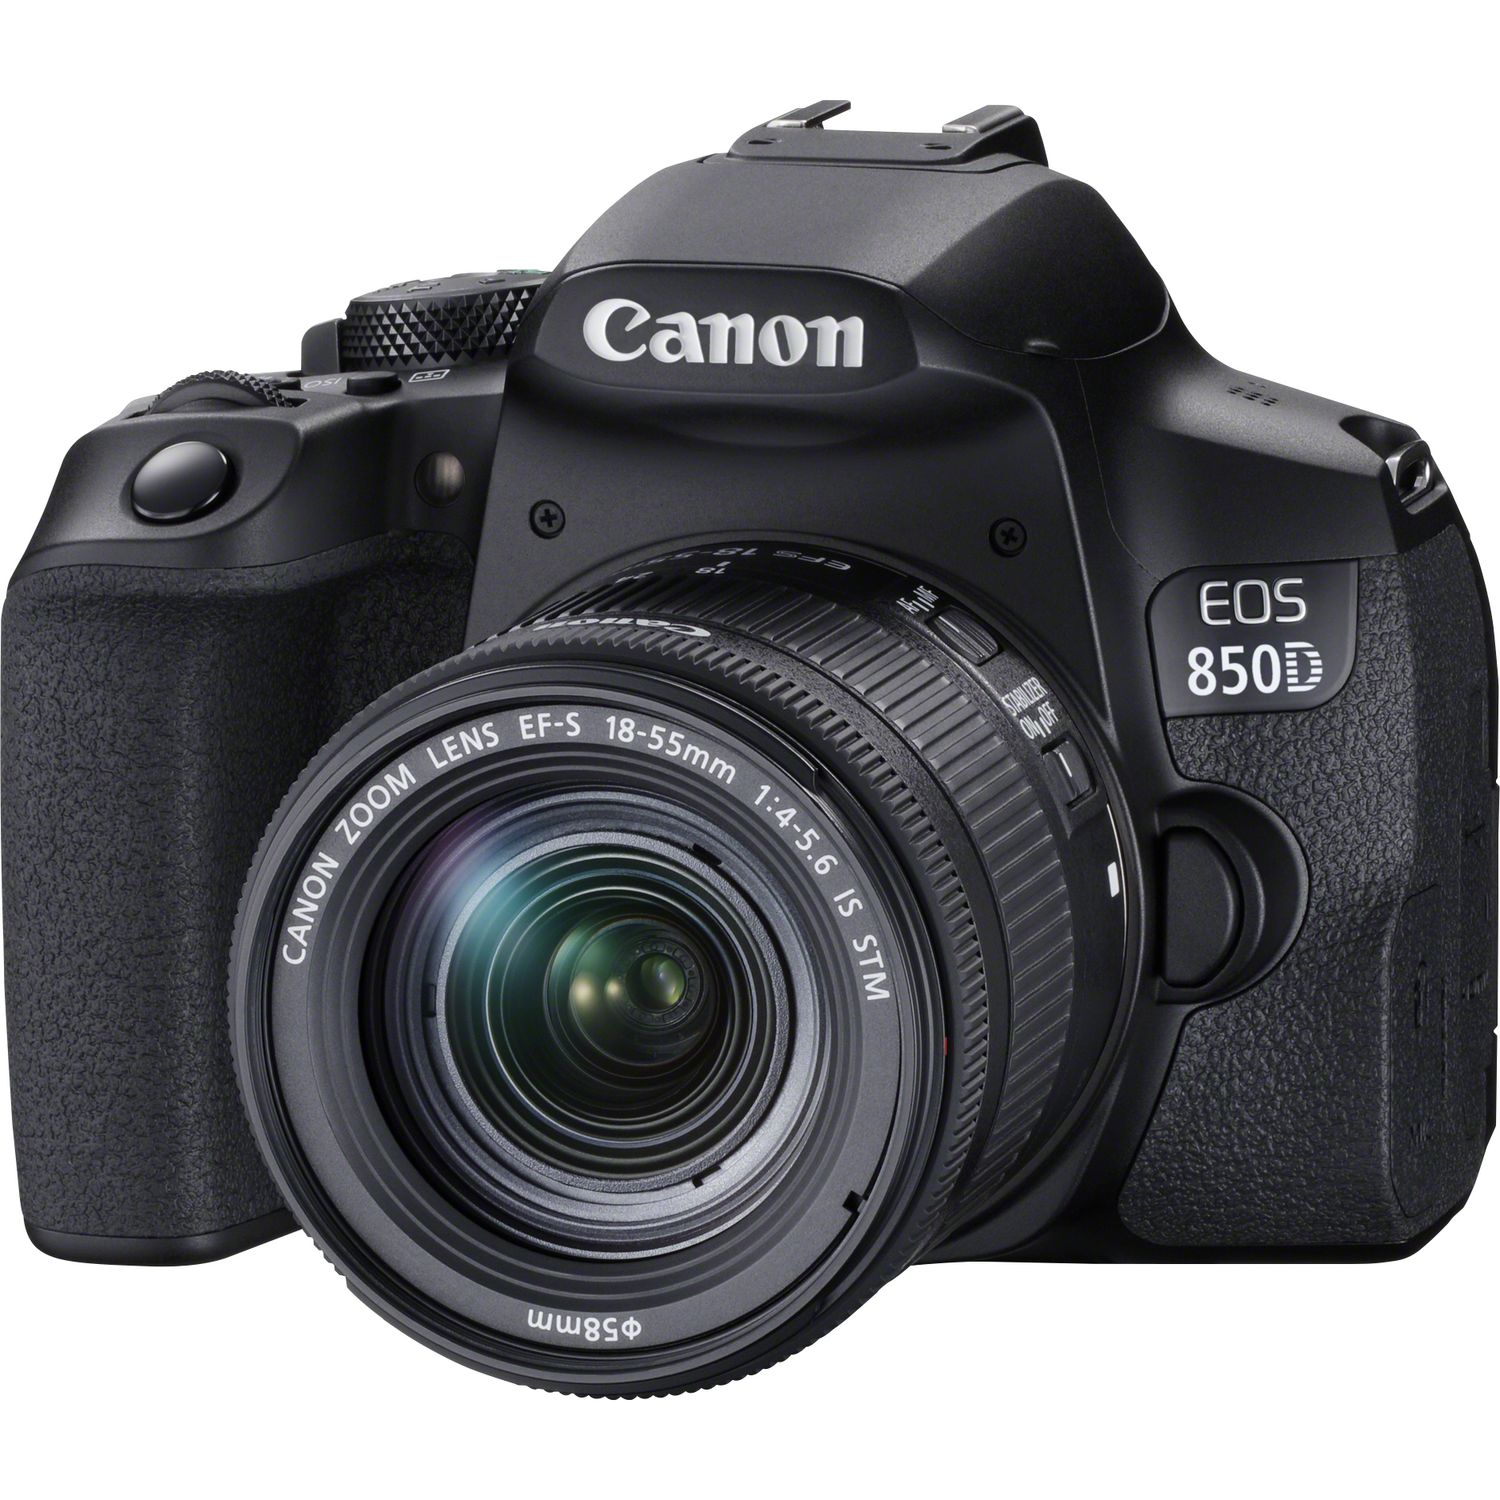 Canon EOS 850D DSLR Camera with EF-S 18-55mm f/4-5.6 IS STM Lens